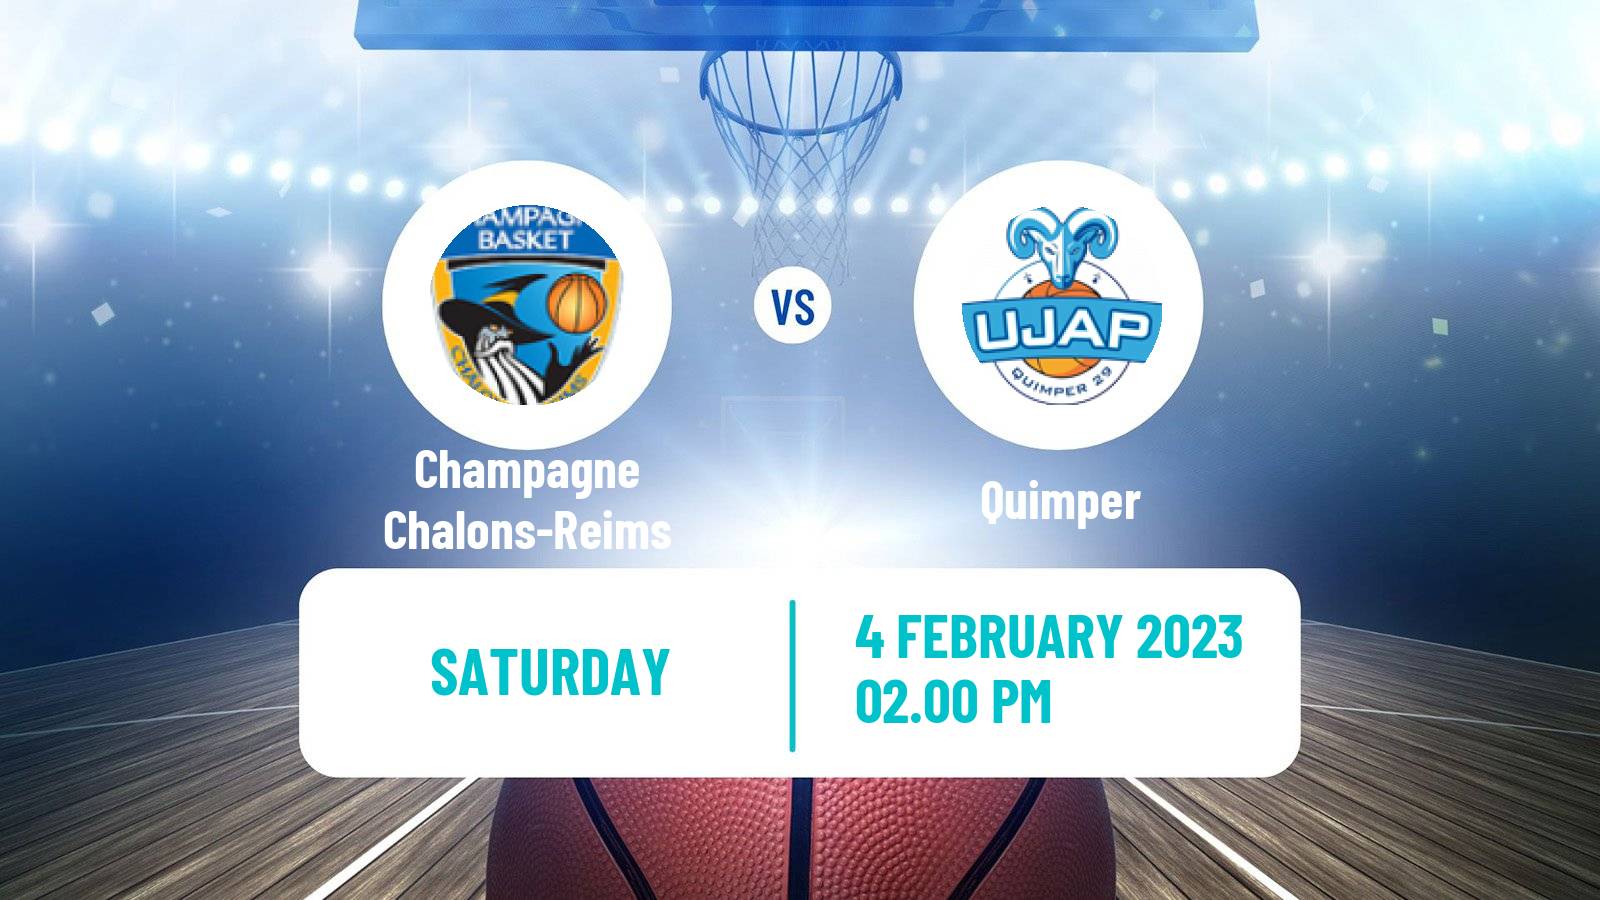 Basketball French LNB Pro B Champagne Chalons-Reims - Quimper